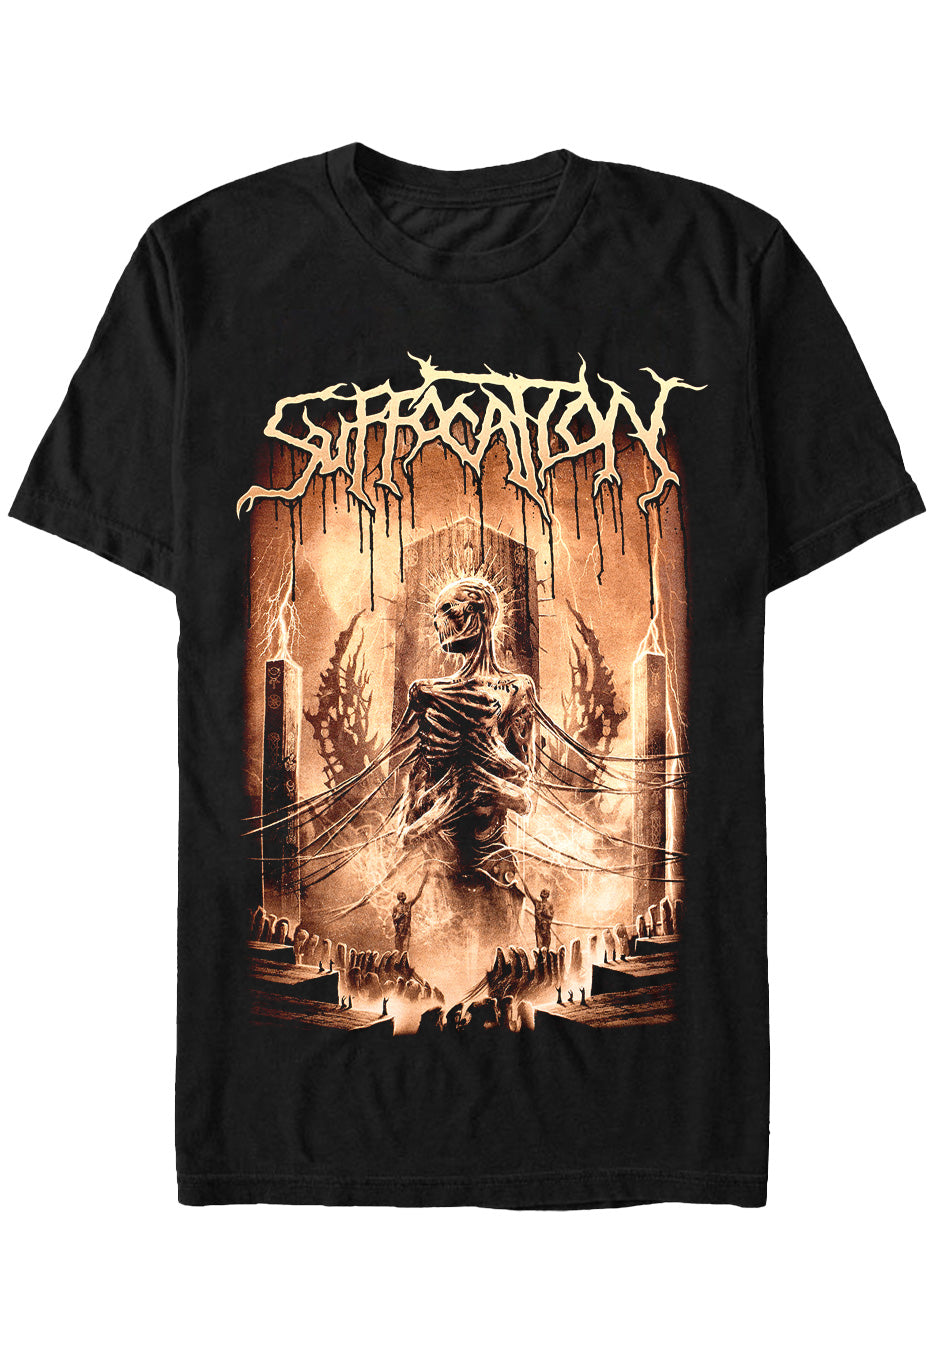 Suffocation - Bow - T-Shirt